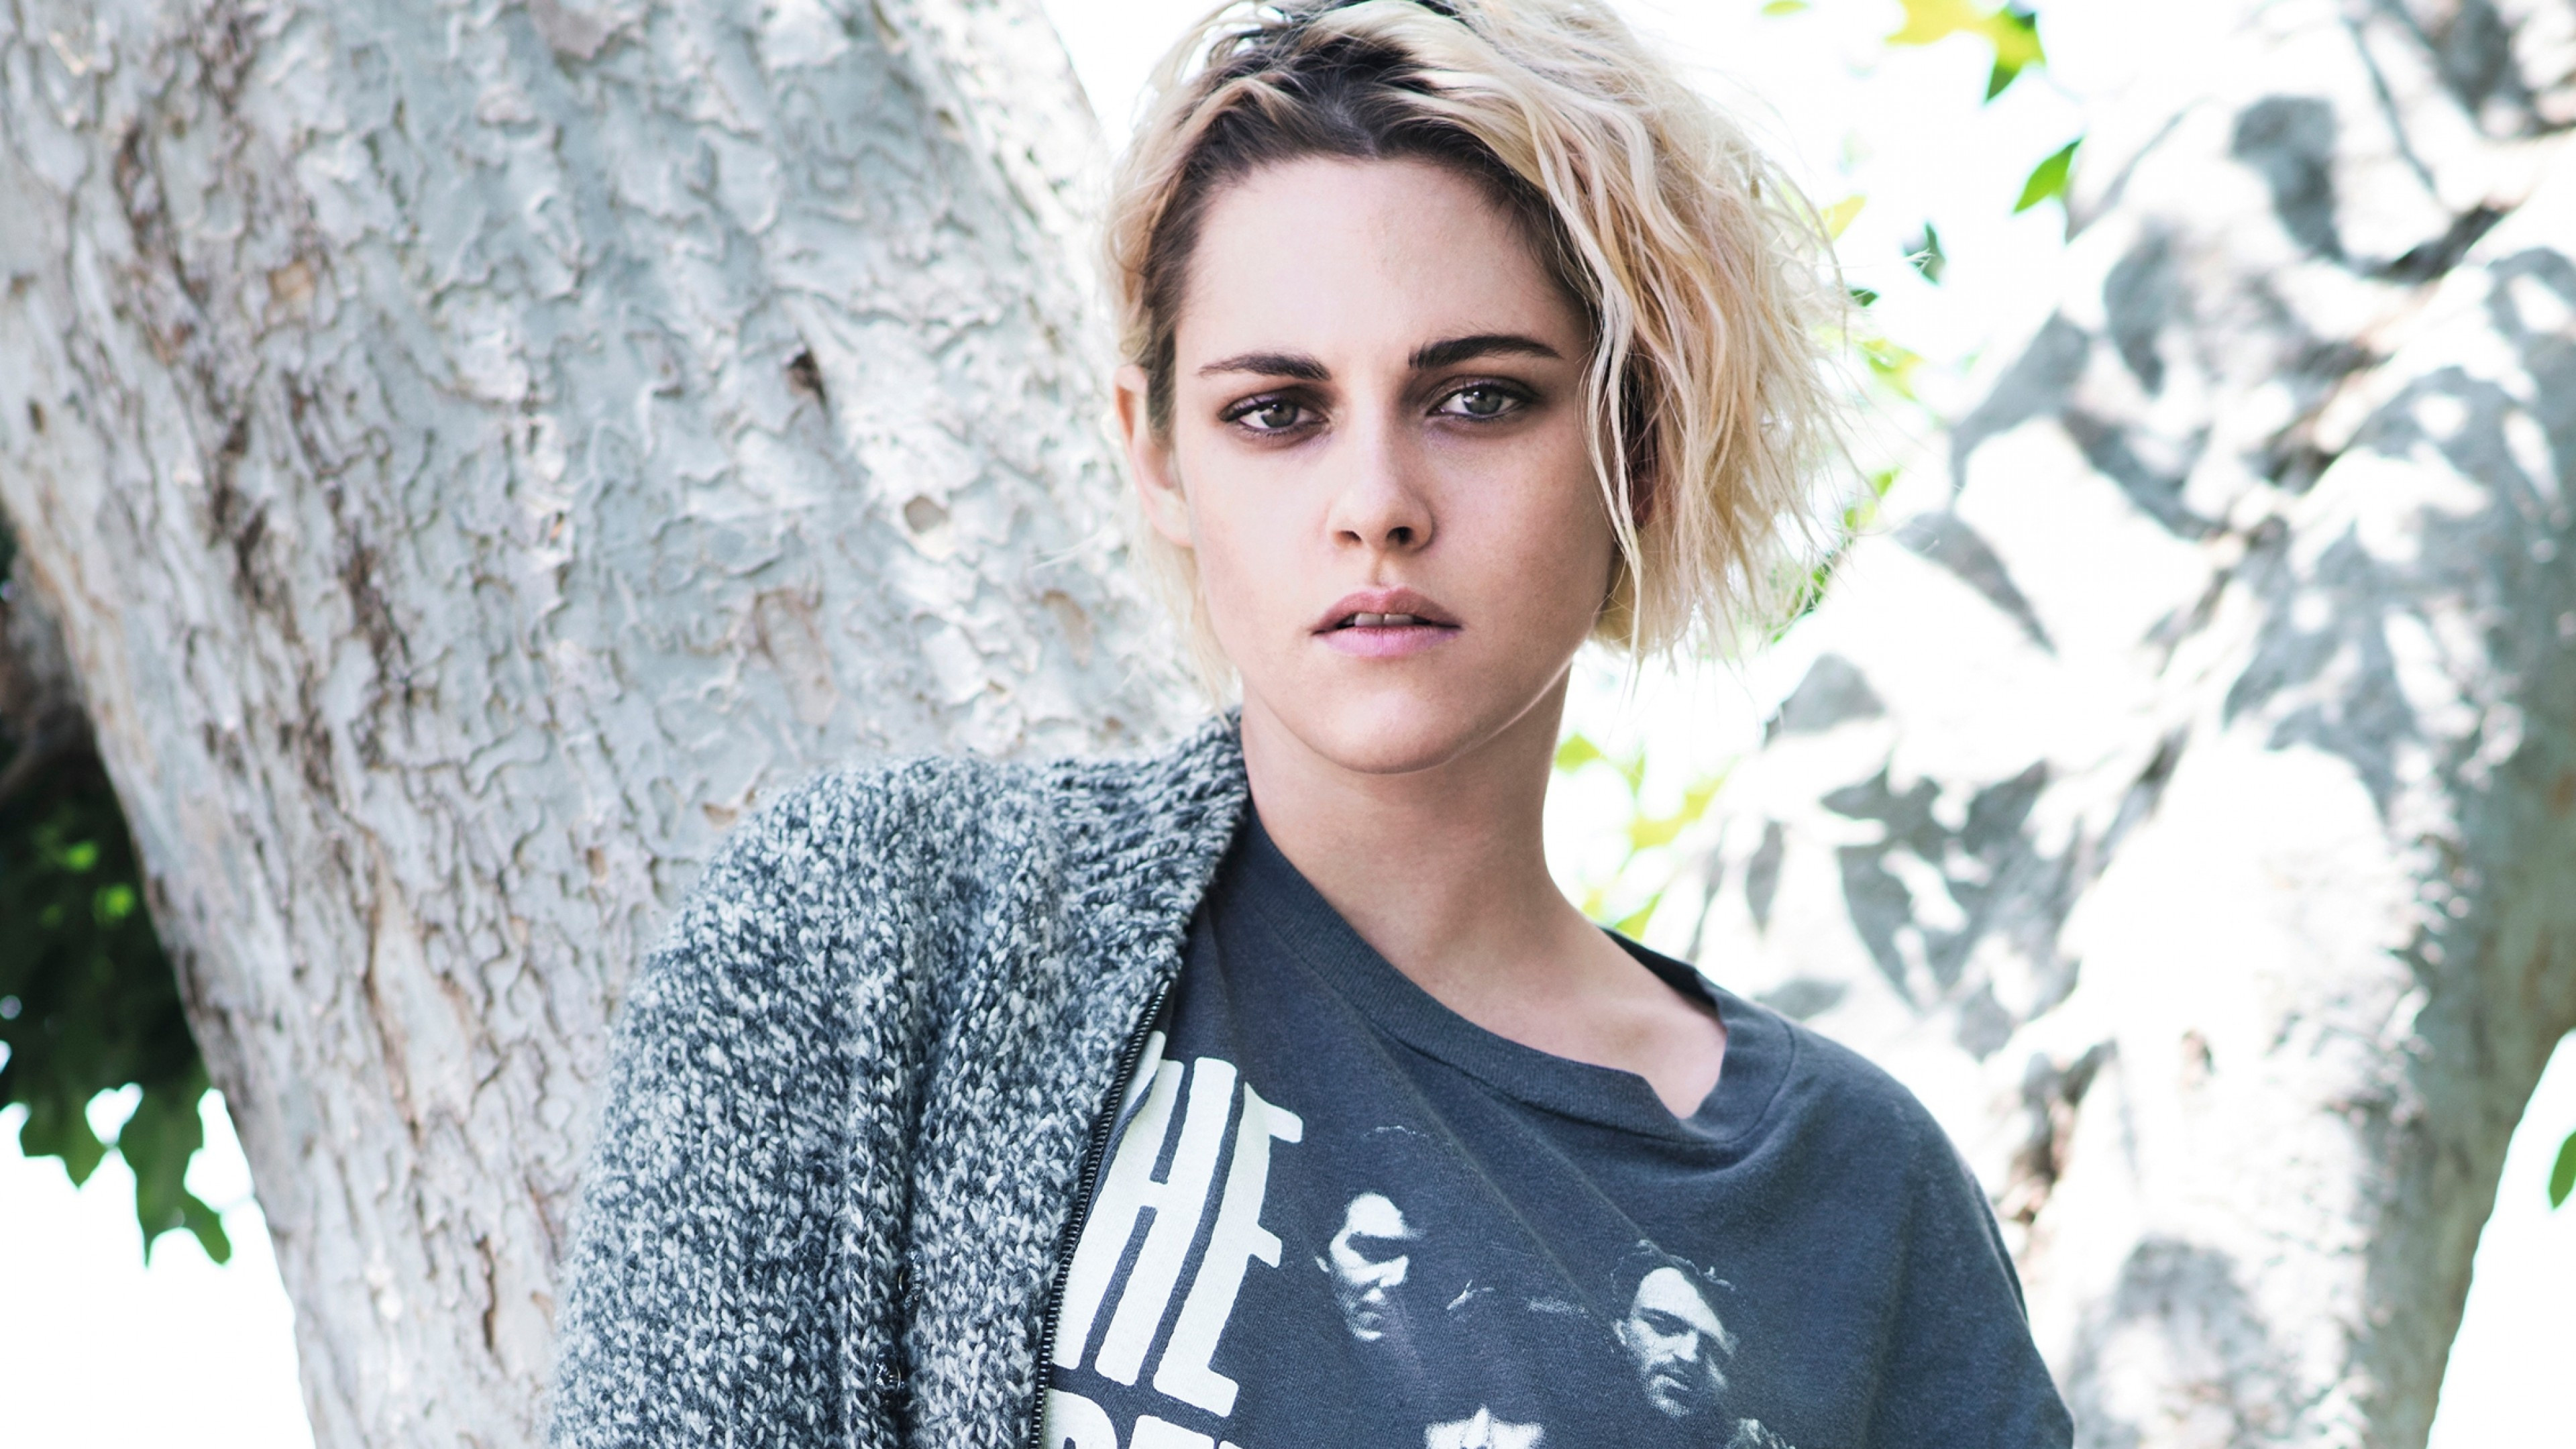 Kristen Stewart: Science fiction romance, Equals, The role of Nia. 3840x2160 4K Background.